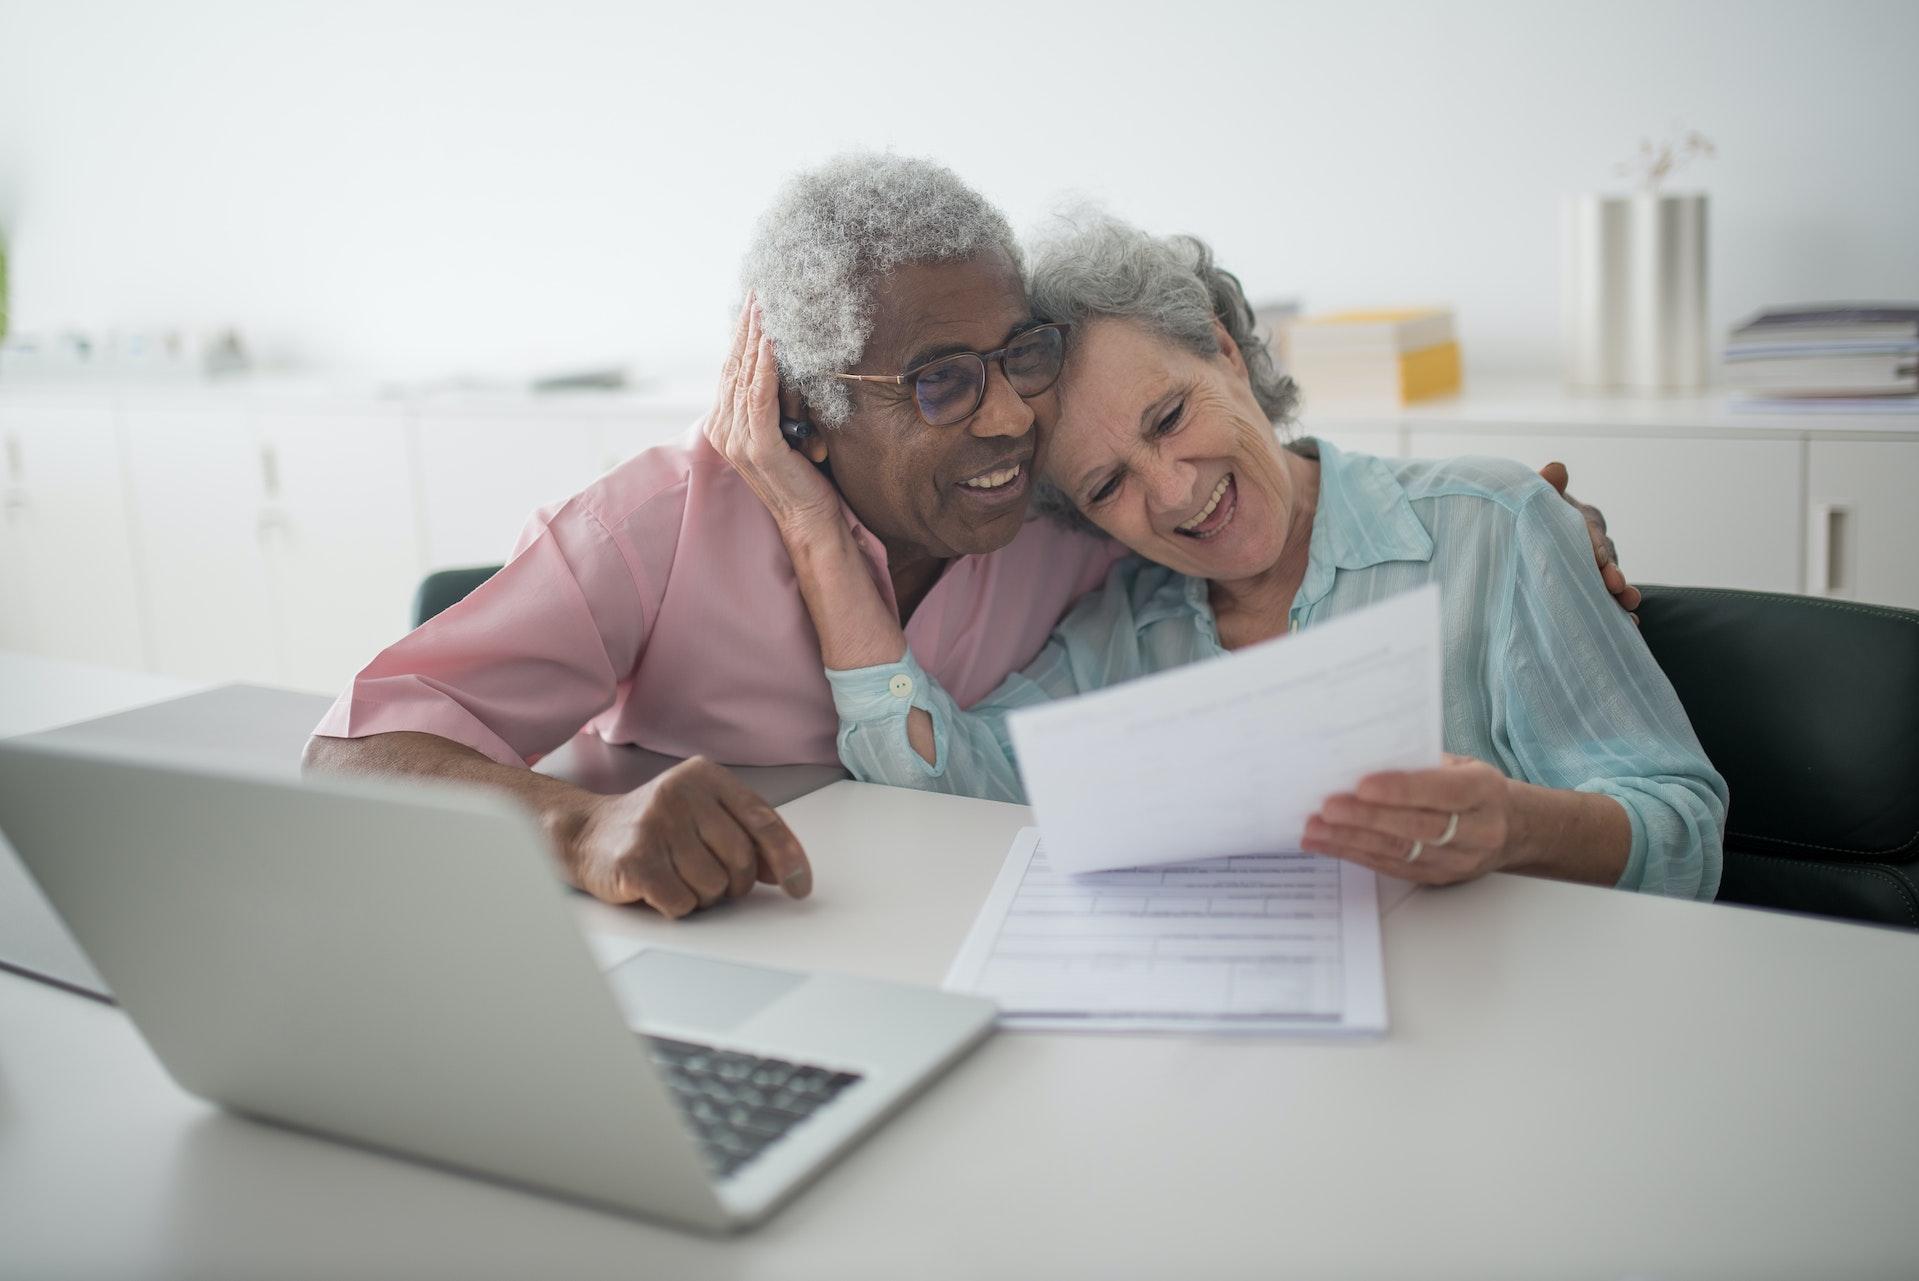 Medicare Advantage Plans May Be the Best Deal for Seniors on a Fixed Income